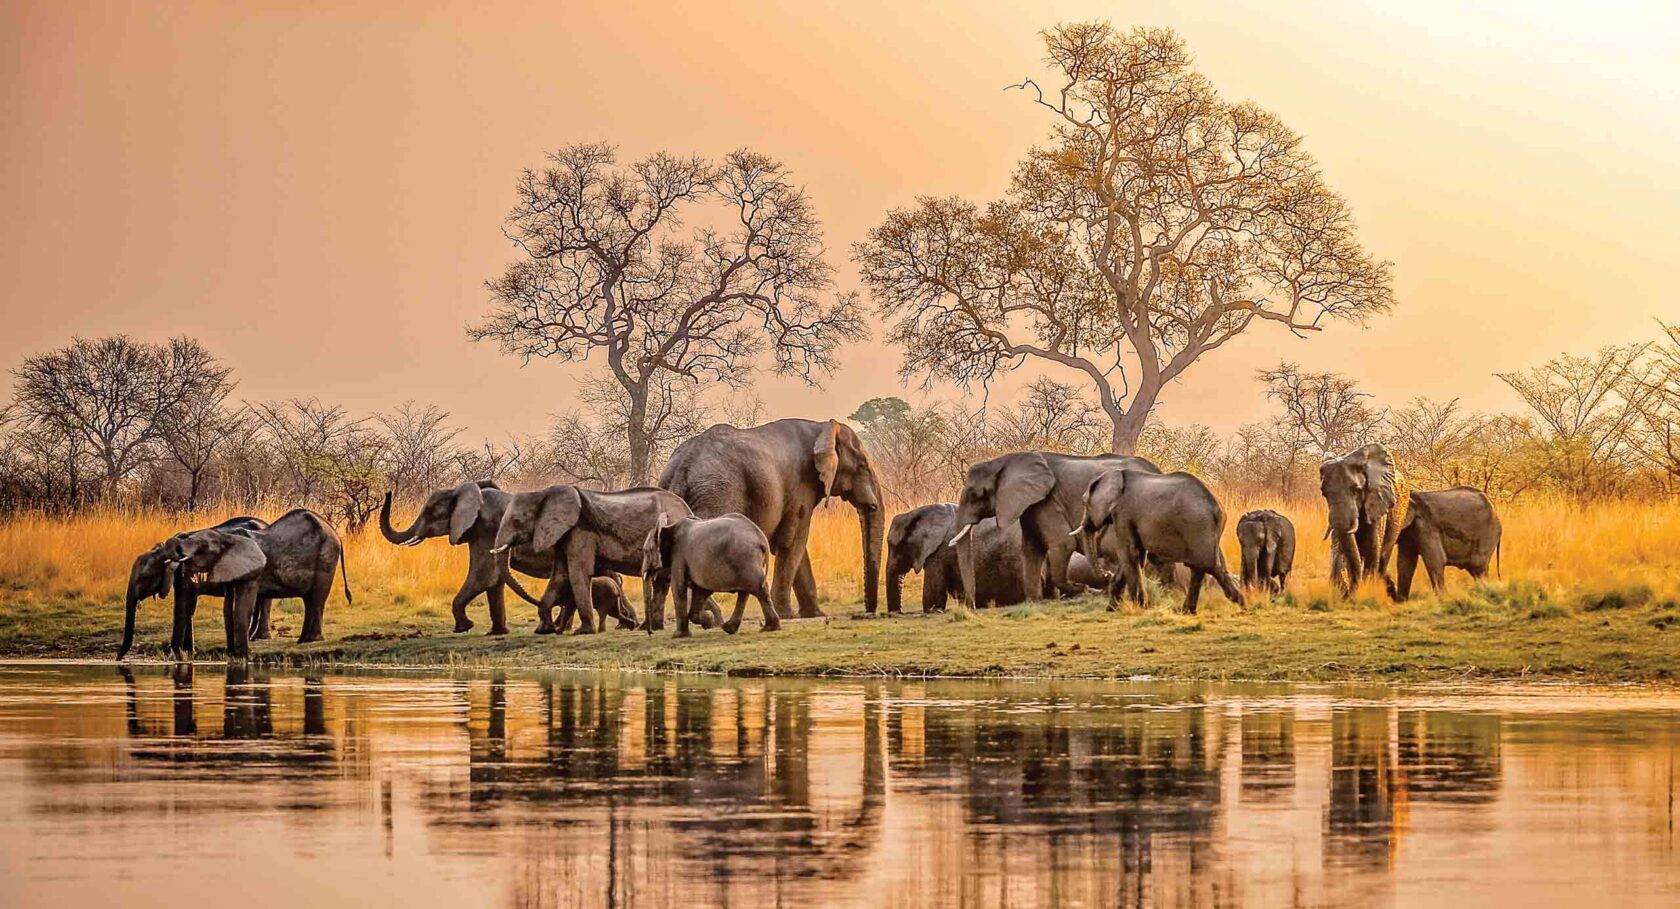 A landscape in Africa with elephants.